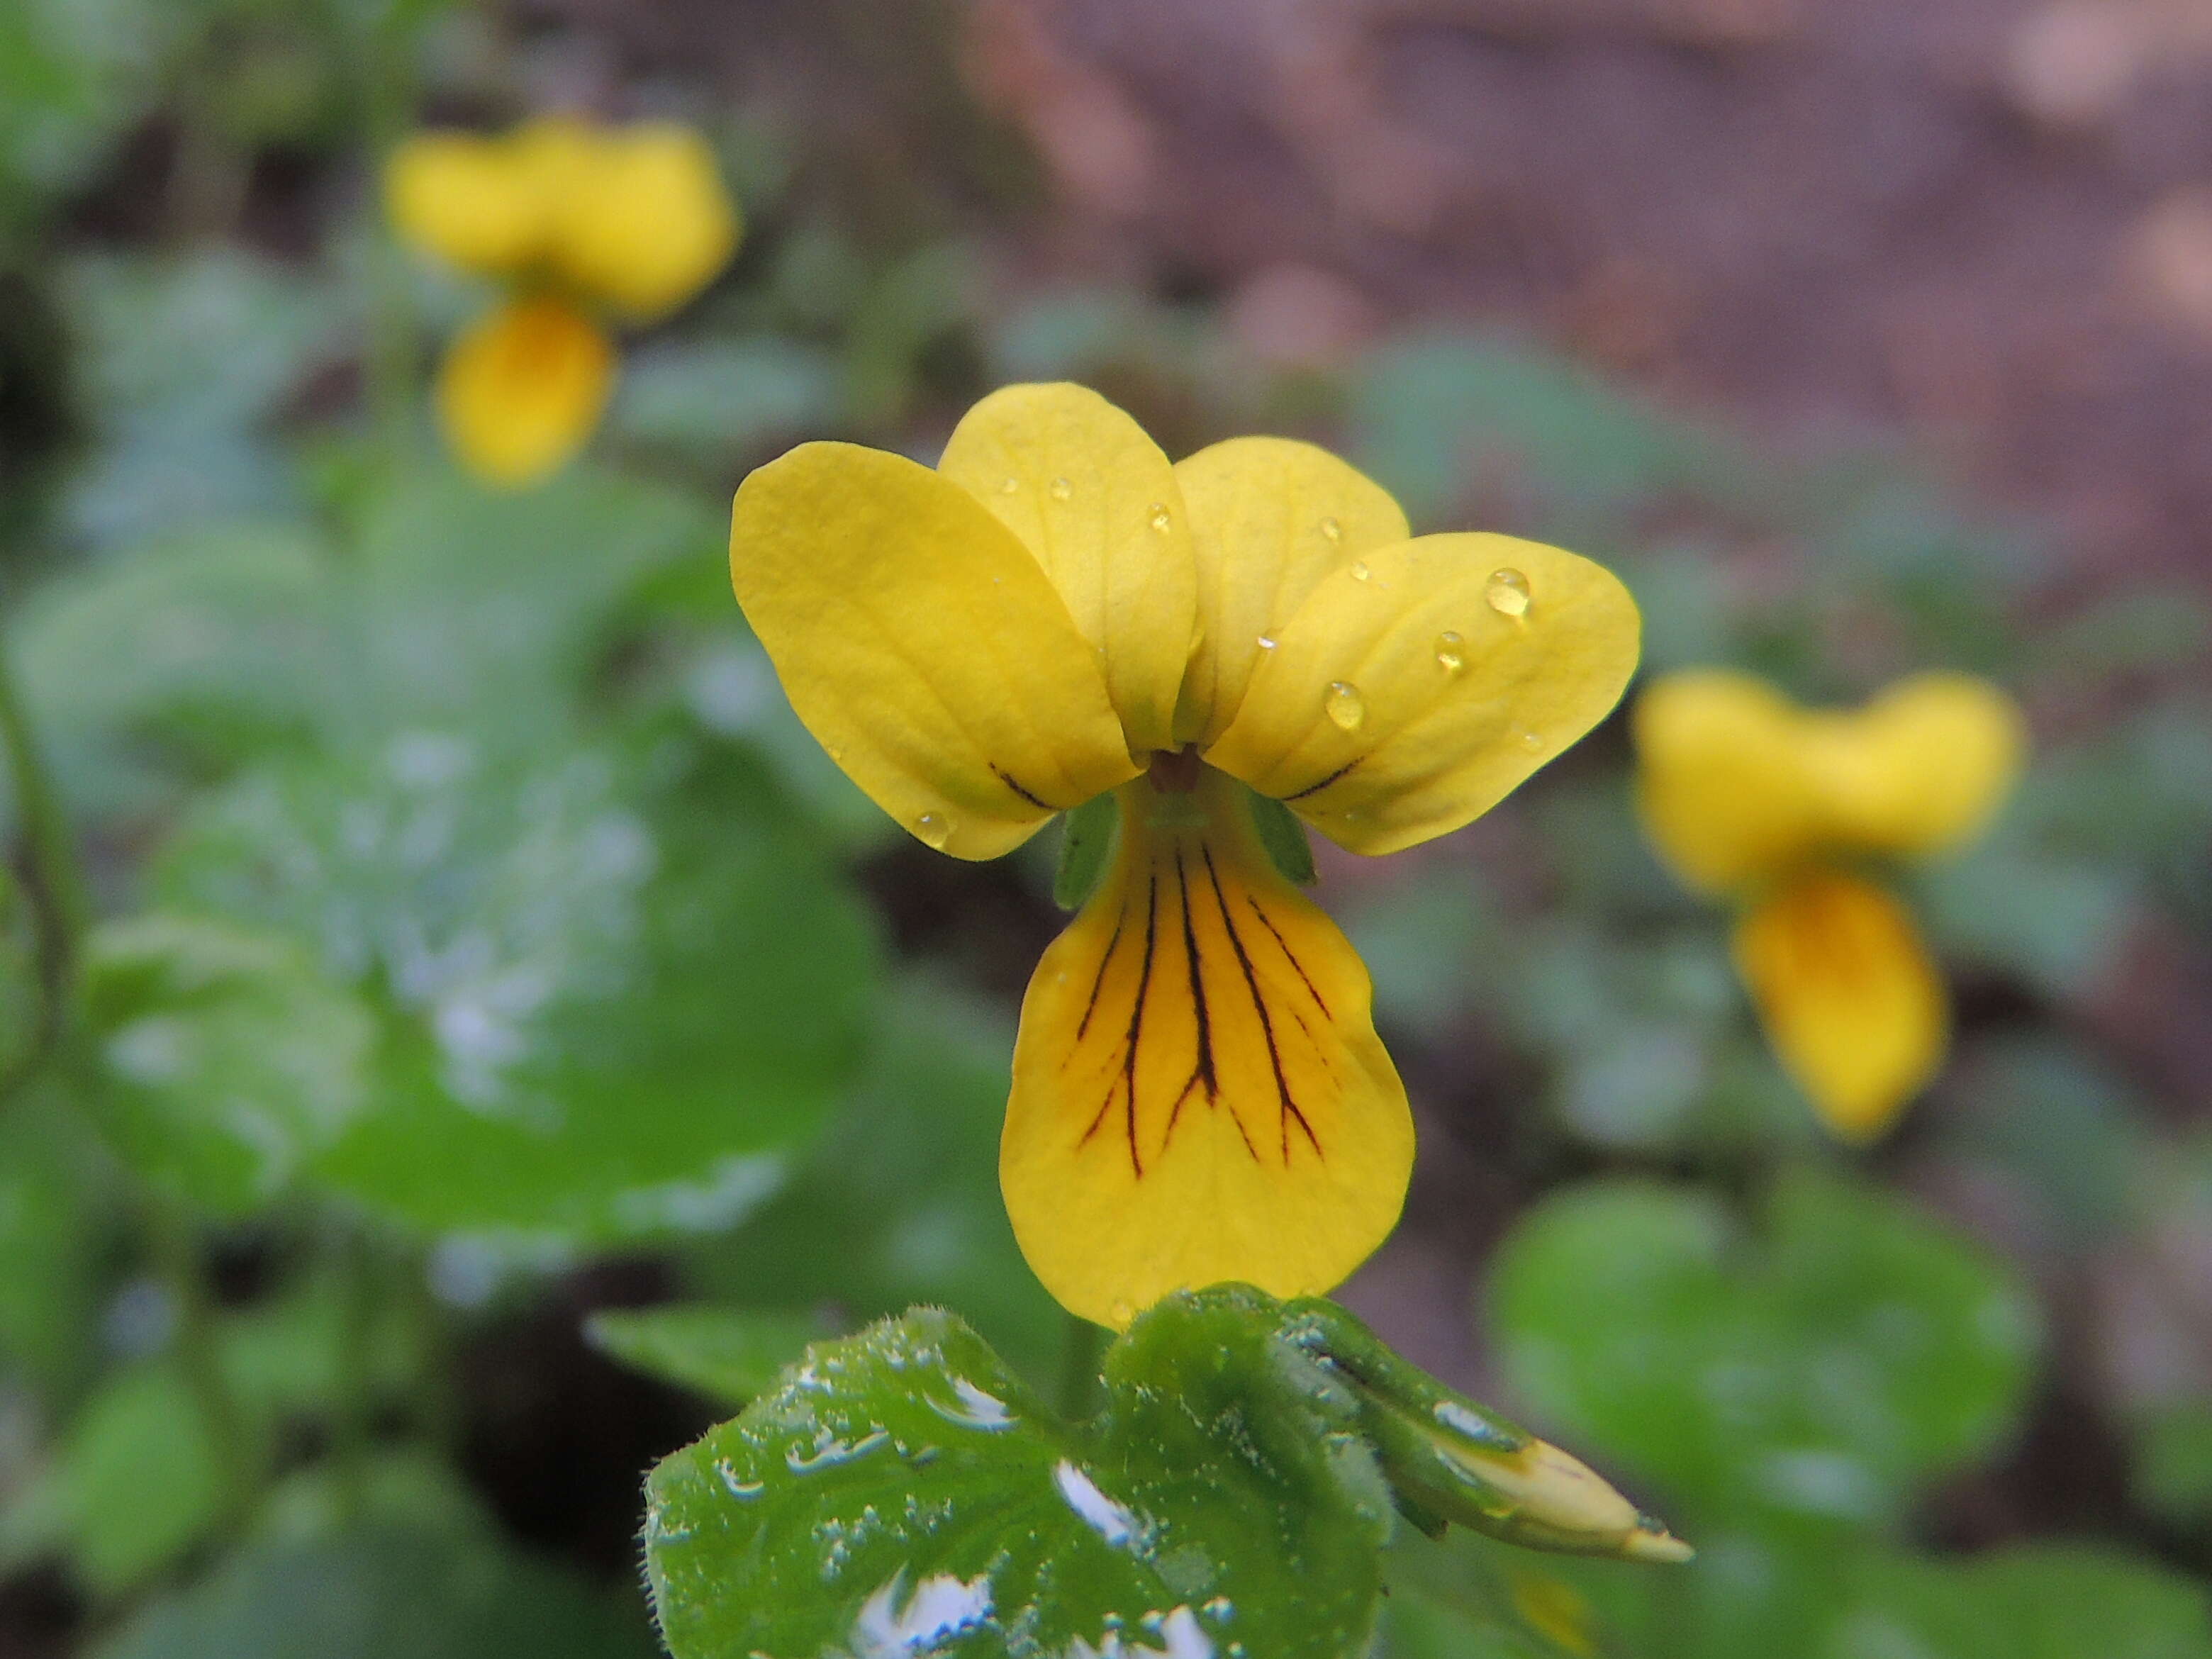 Image of arctic yellow violet